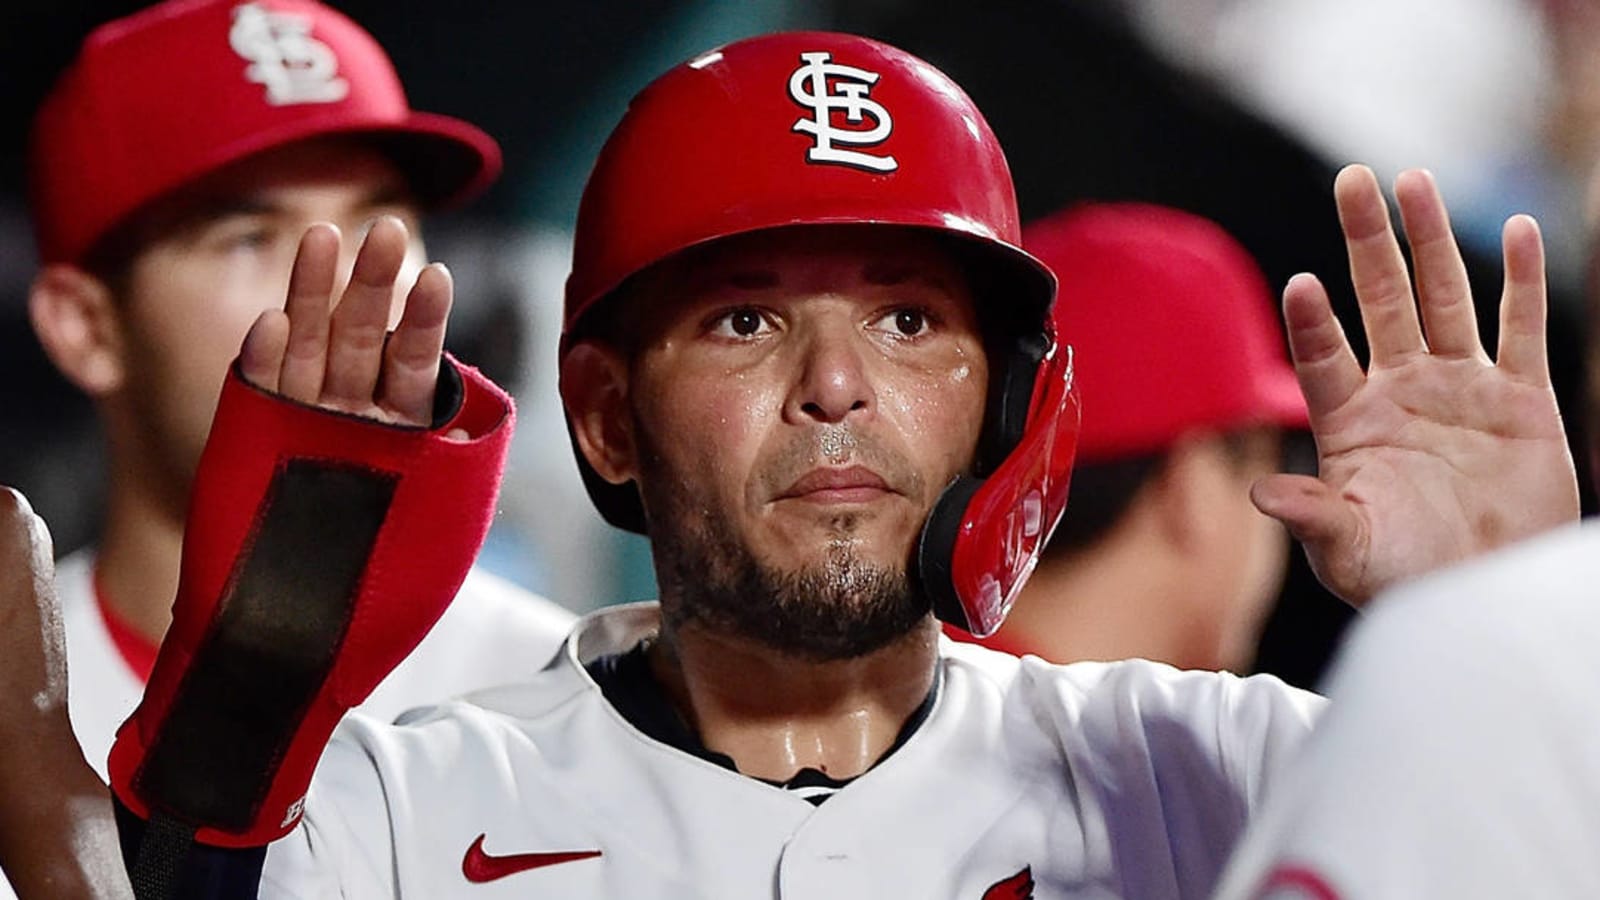 Report: Cardinals, Molina discussing one-year extension